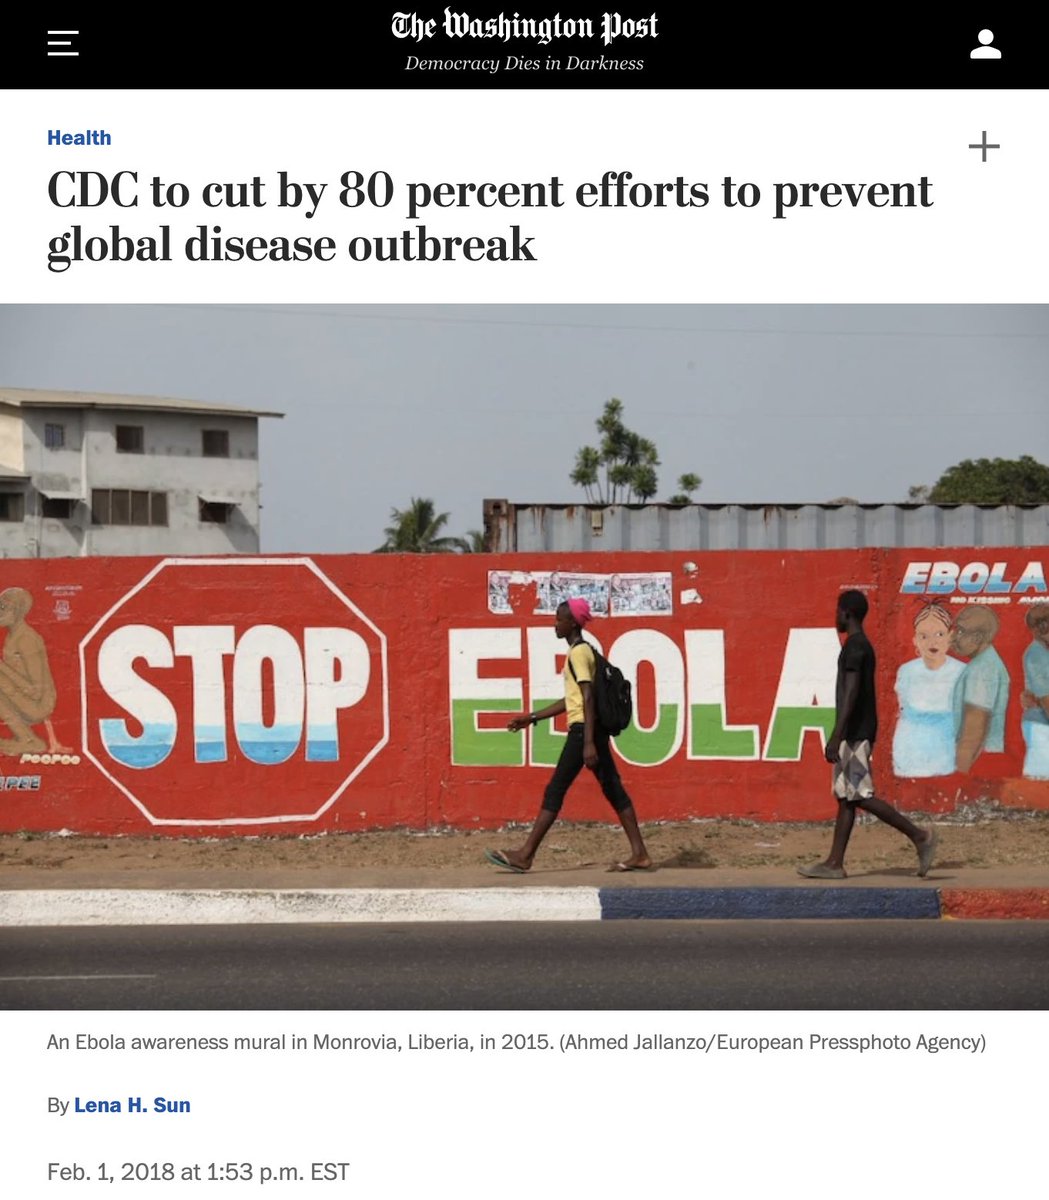 1) In early 2018, the Trump administration cut CDC efforts to curb the spread of infectious-disease epidemics by 80%. https://www.washingtonpost.com/news/to-your-health/wp/2018/02/01/cdc-to-cut-by-80-percent-efforts-to-prevent-global-disease-outbreak/